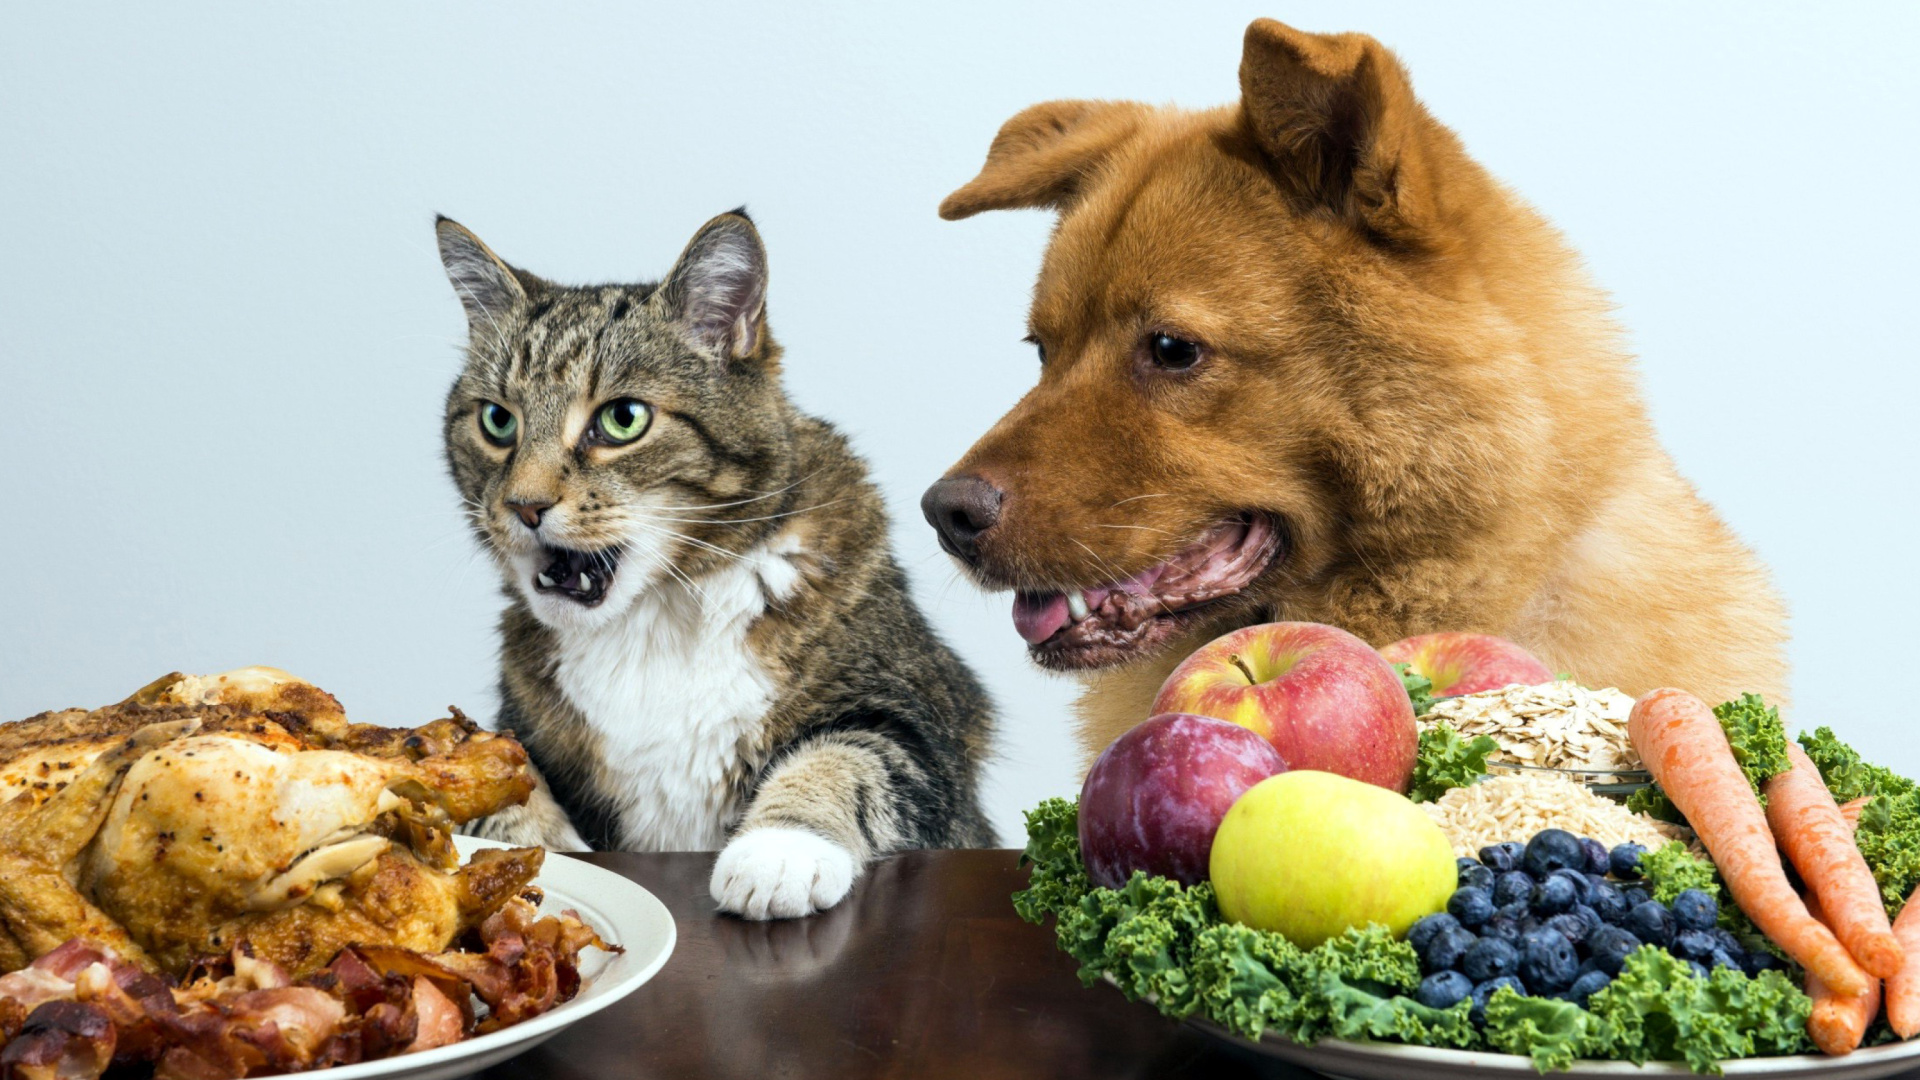 Dog and Cat Dinner wallpaper 1920x1080